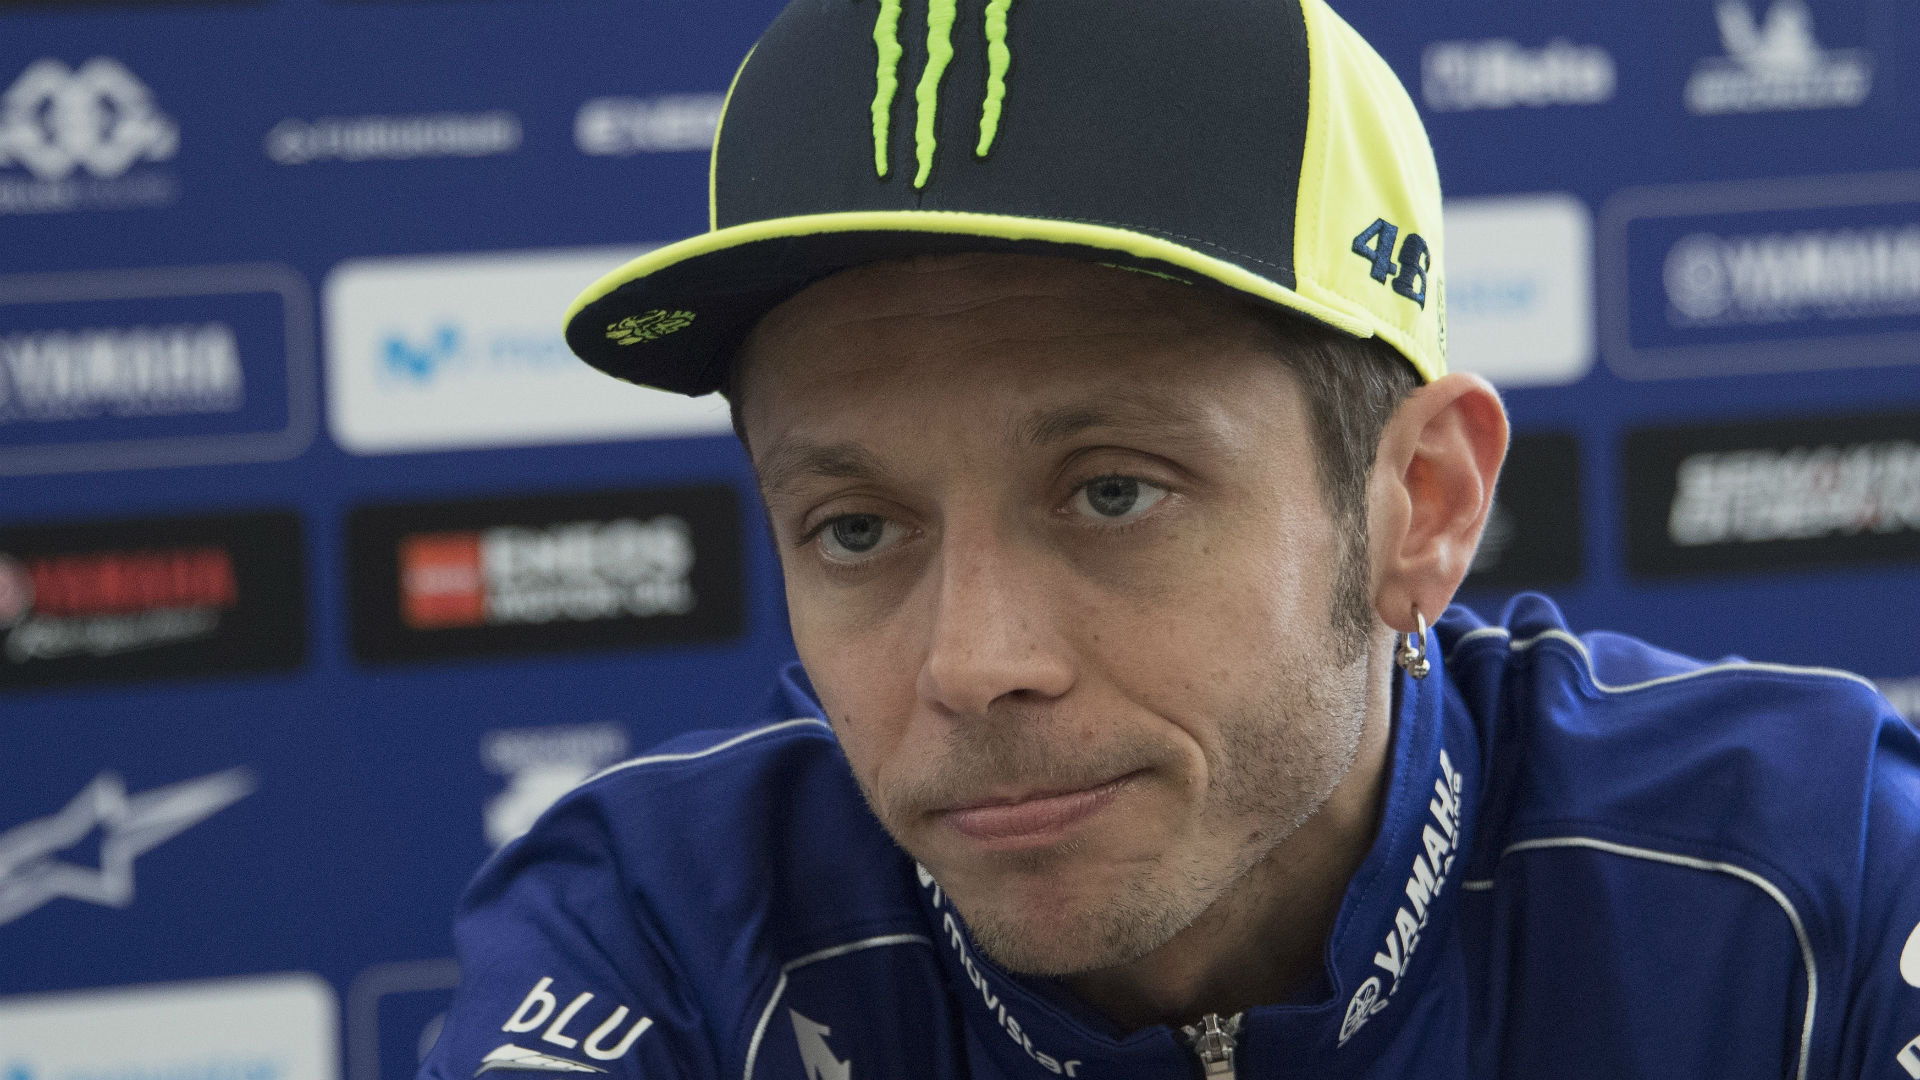 Bumps on the Circuit of the Americas track are a disaster, according to Movistar Yamaha rider Valentino Rossi.